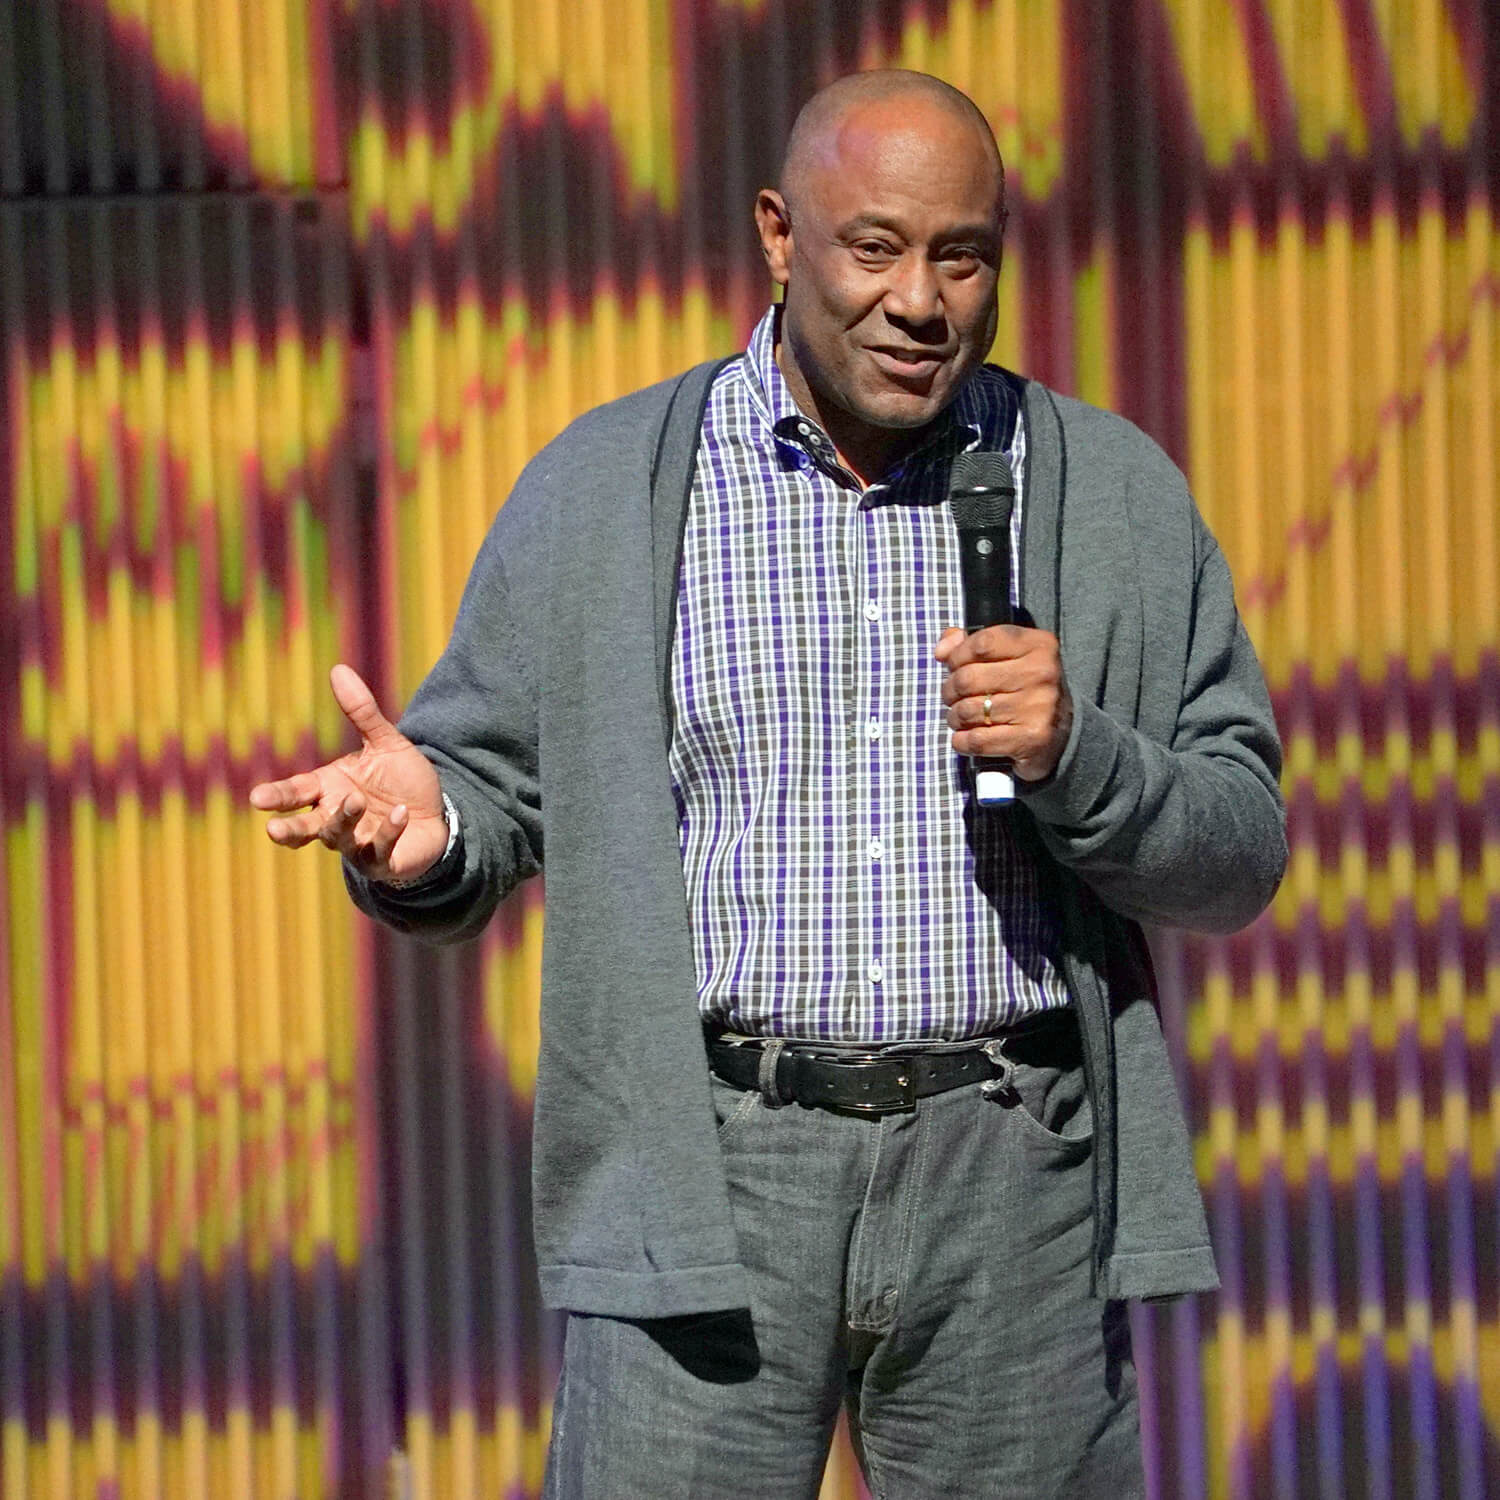 Mount Allen on stage holding a microphone in front of an abstract backdrop